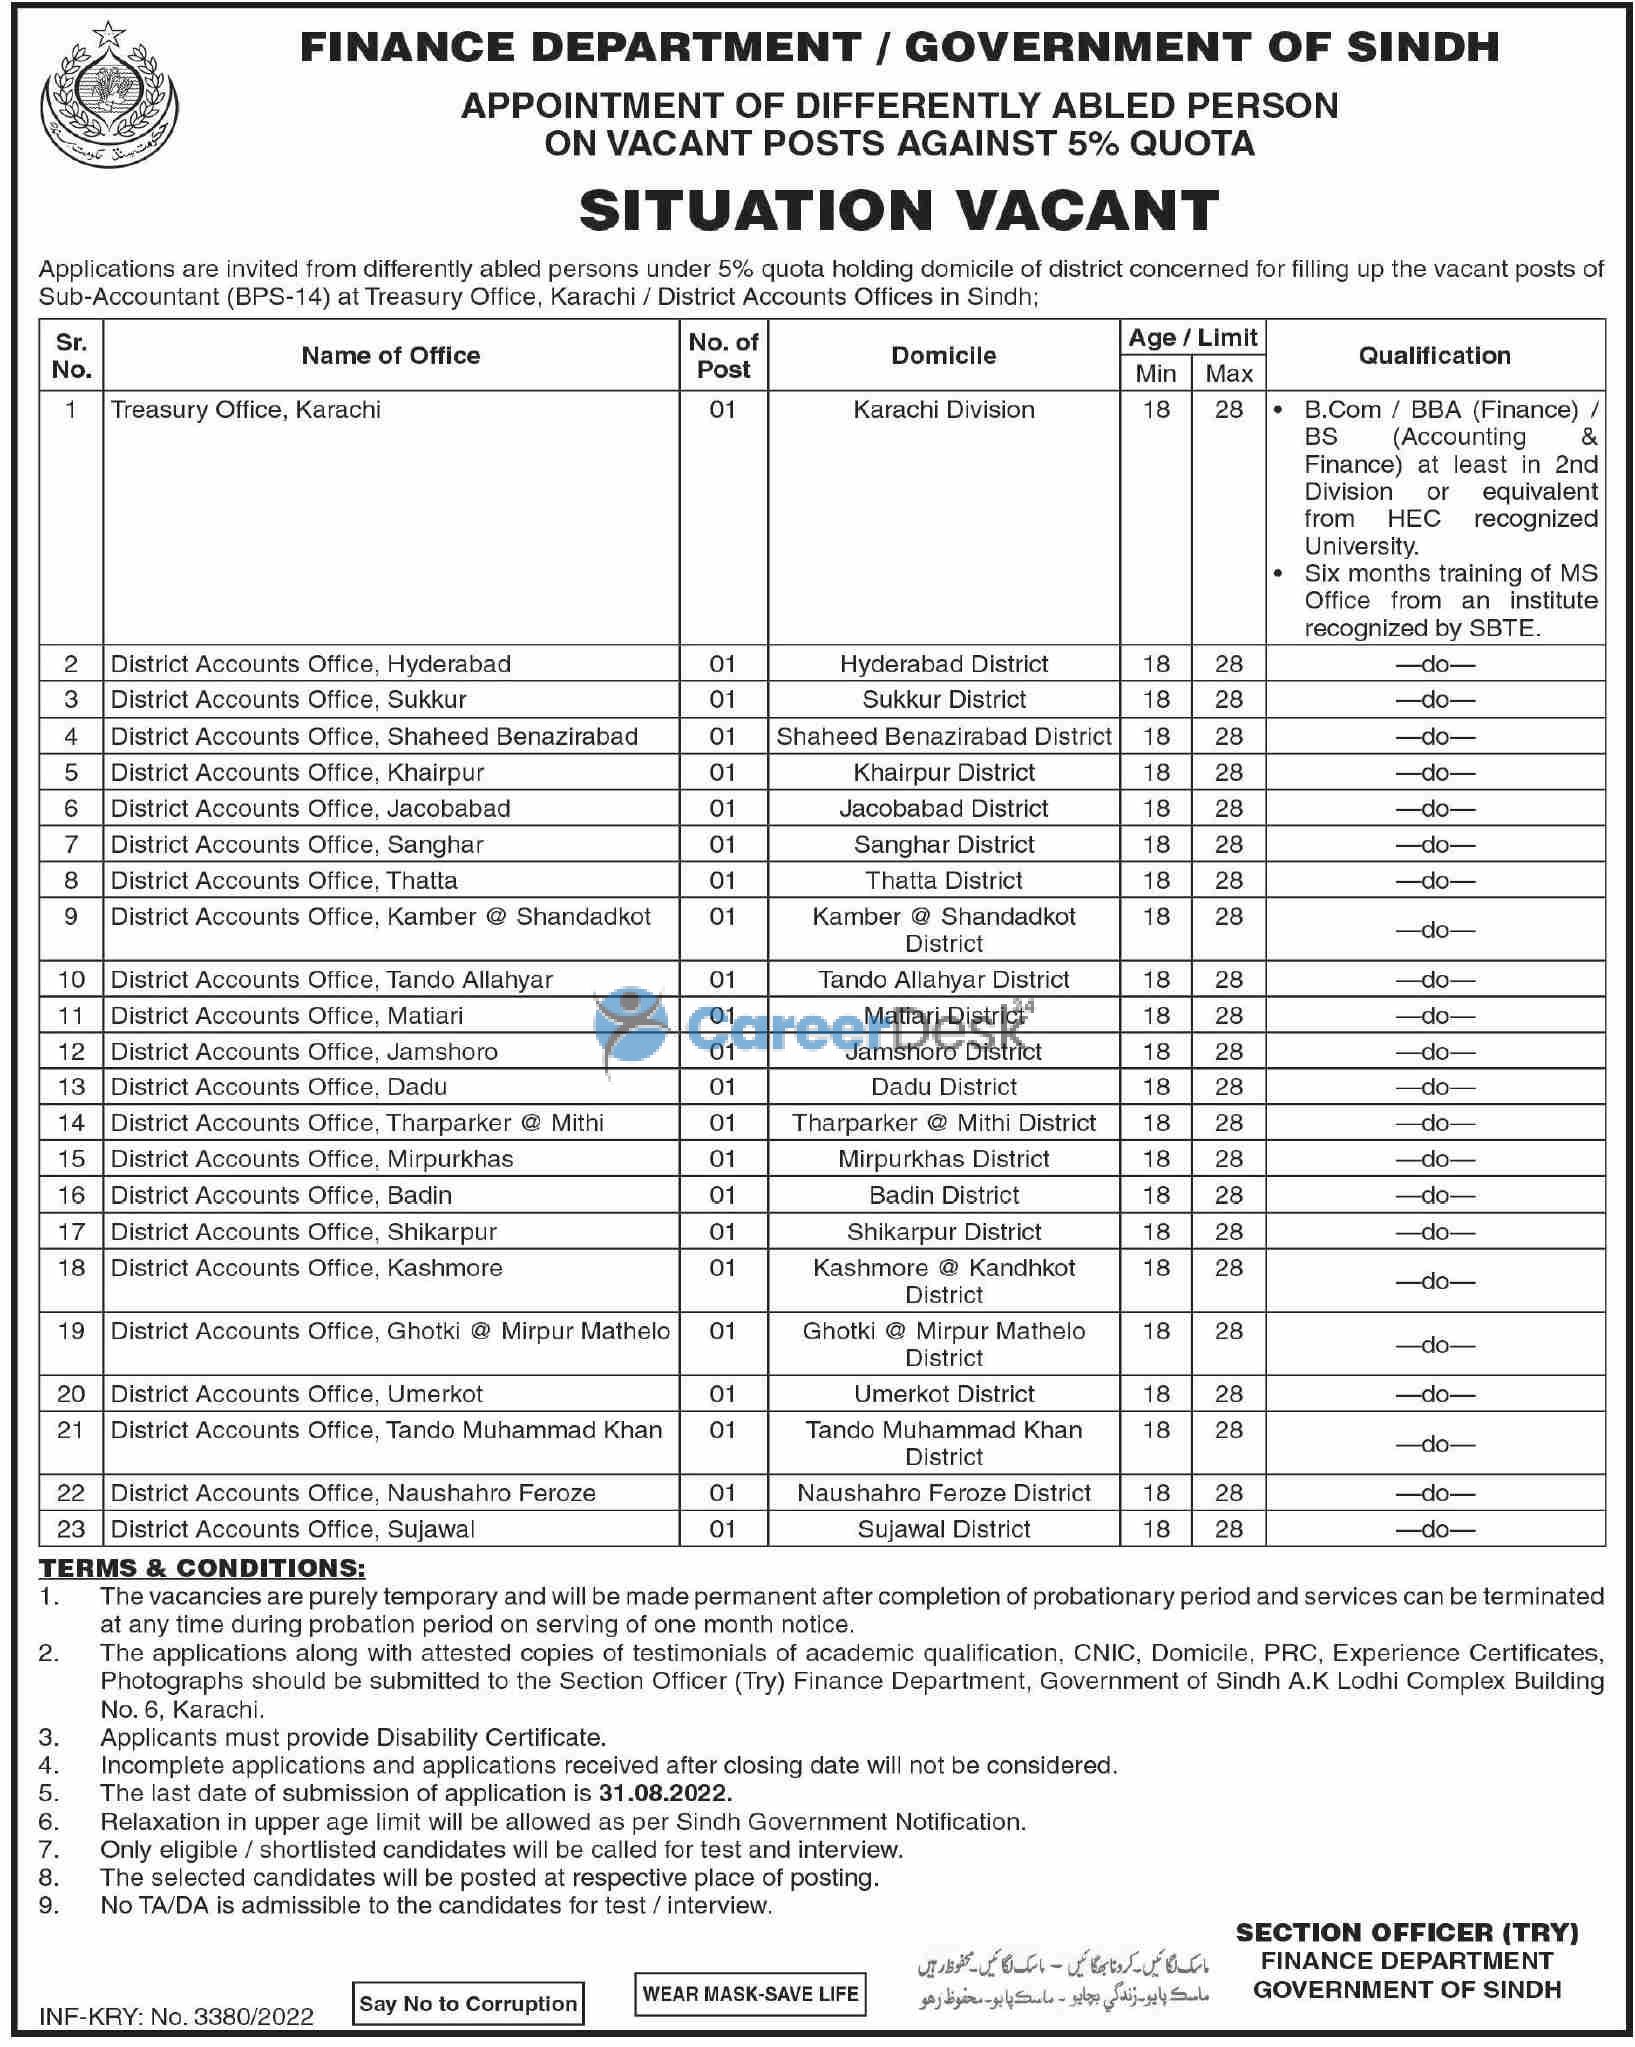 Ministry of Finance Department Head Office Announced Latest Jobs 2022